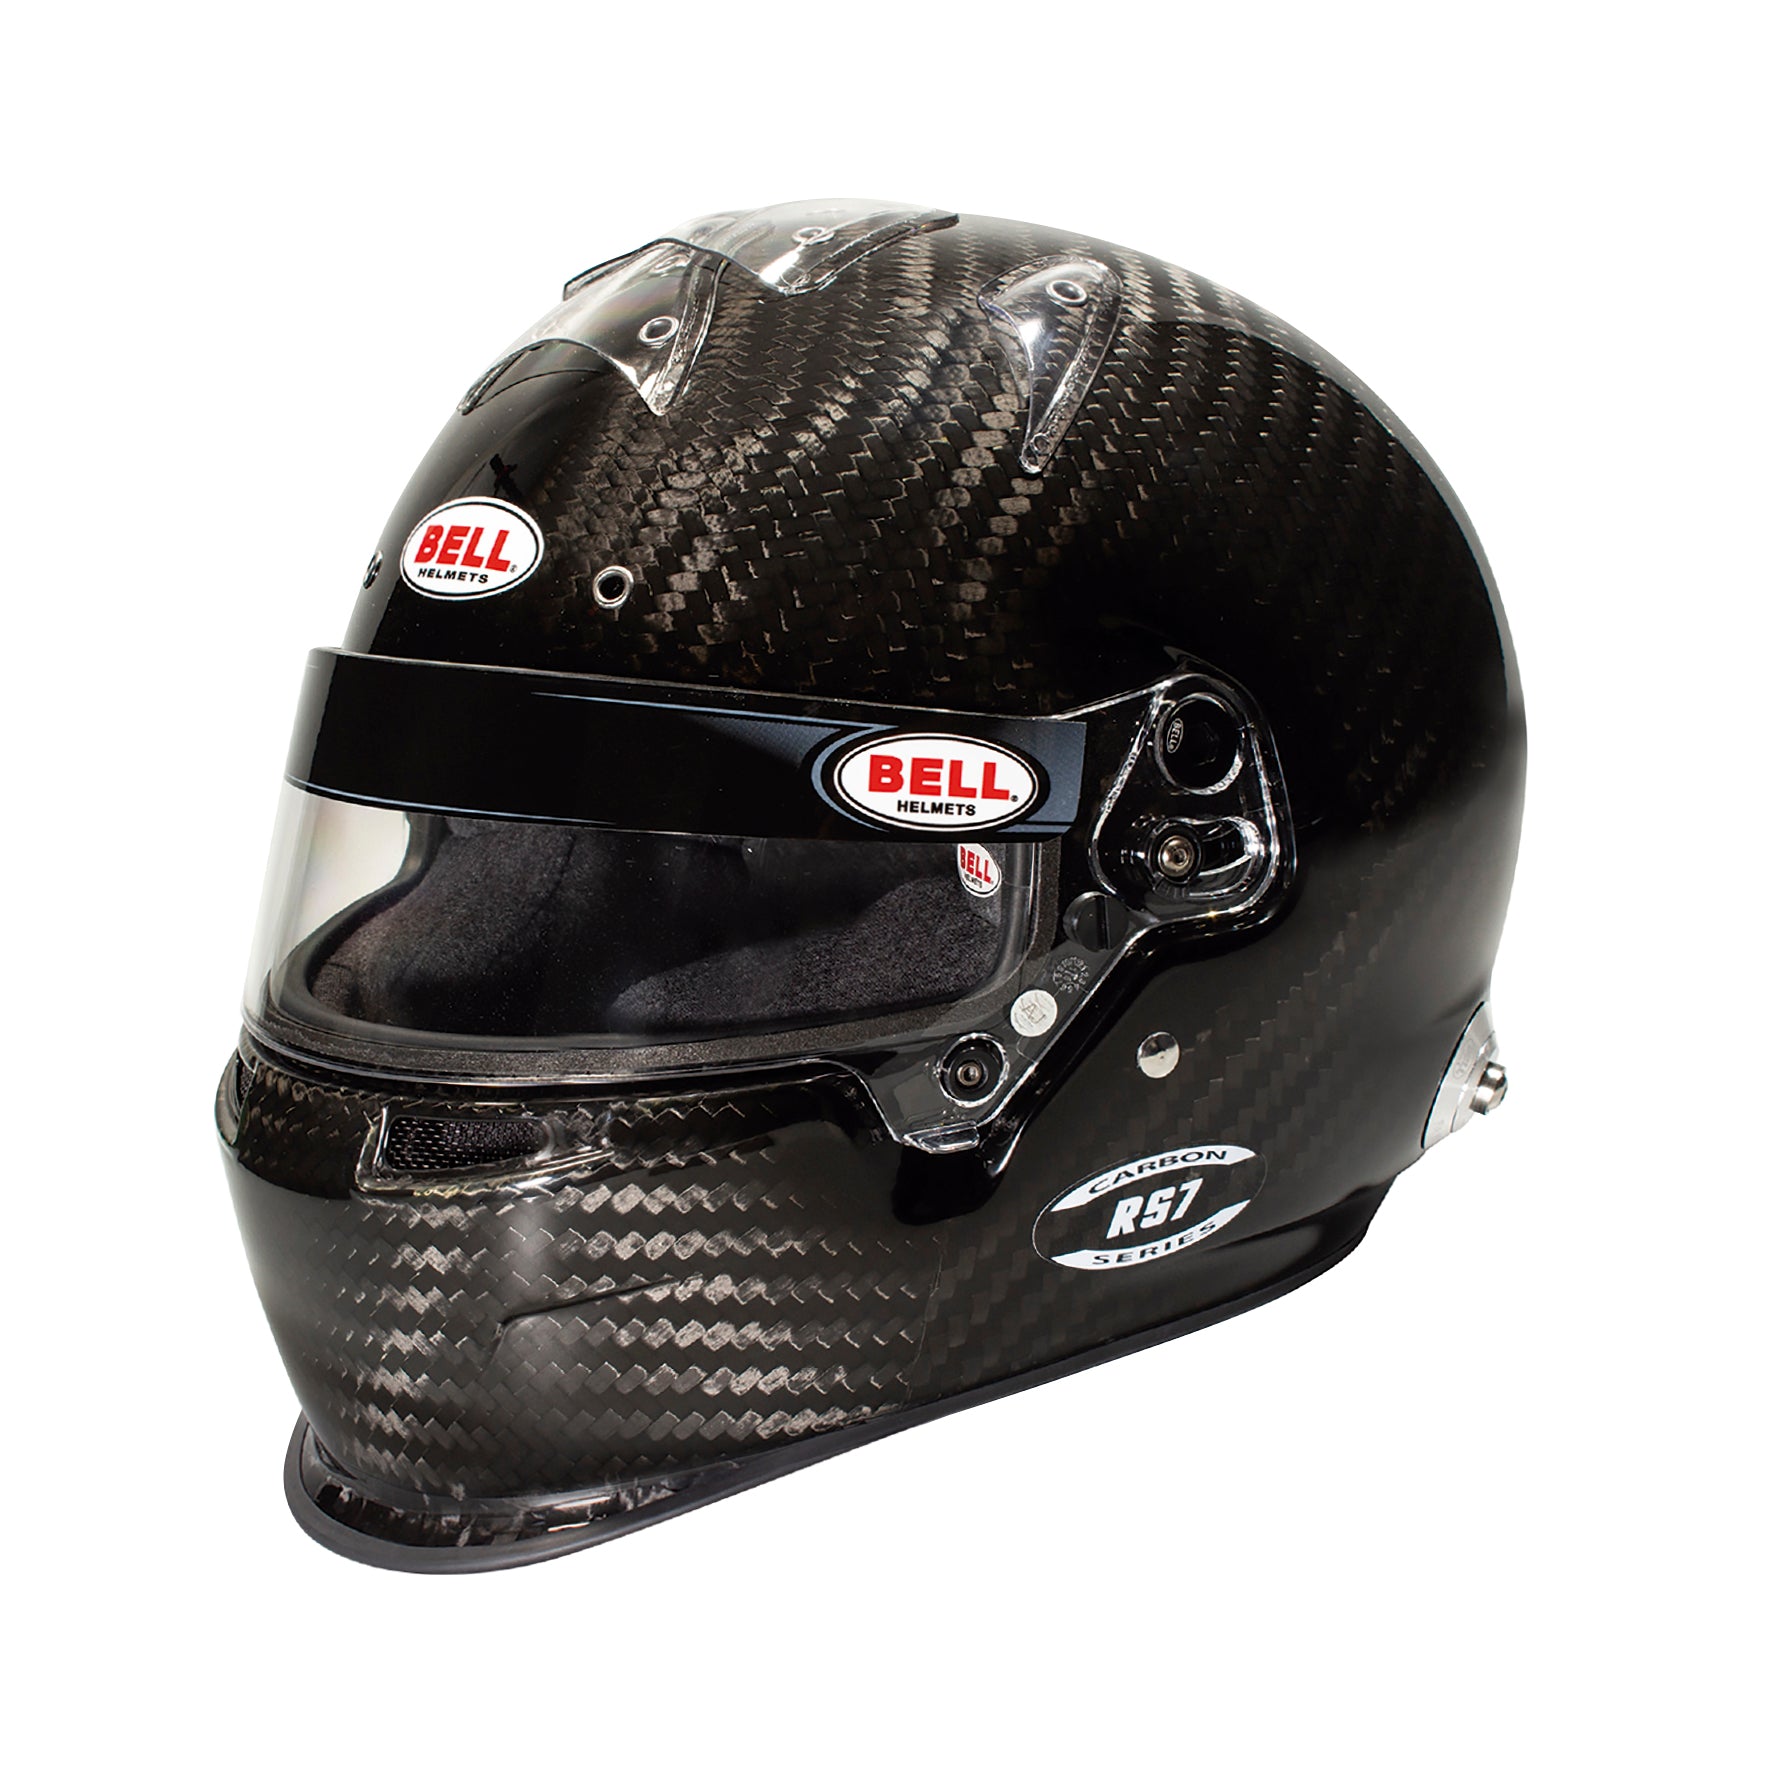 BELL 1204A11 Шолом full face RS7 CARBON DUCKBILL, HANS, FIA, size 61 (7 5/8) Photo-1 